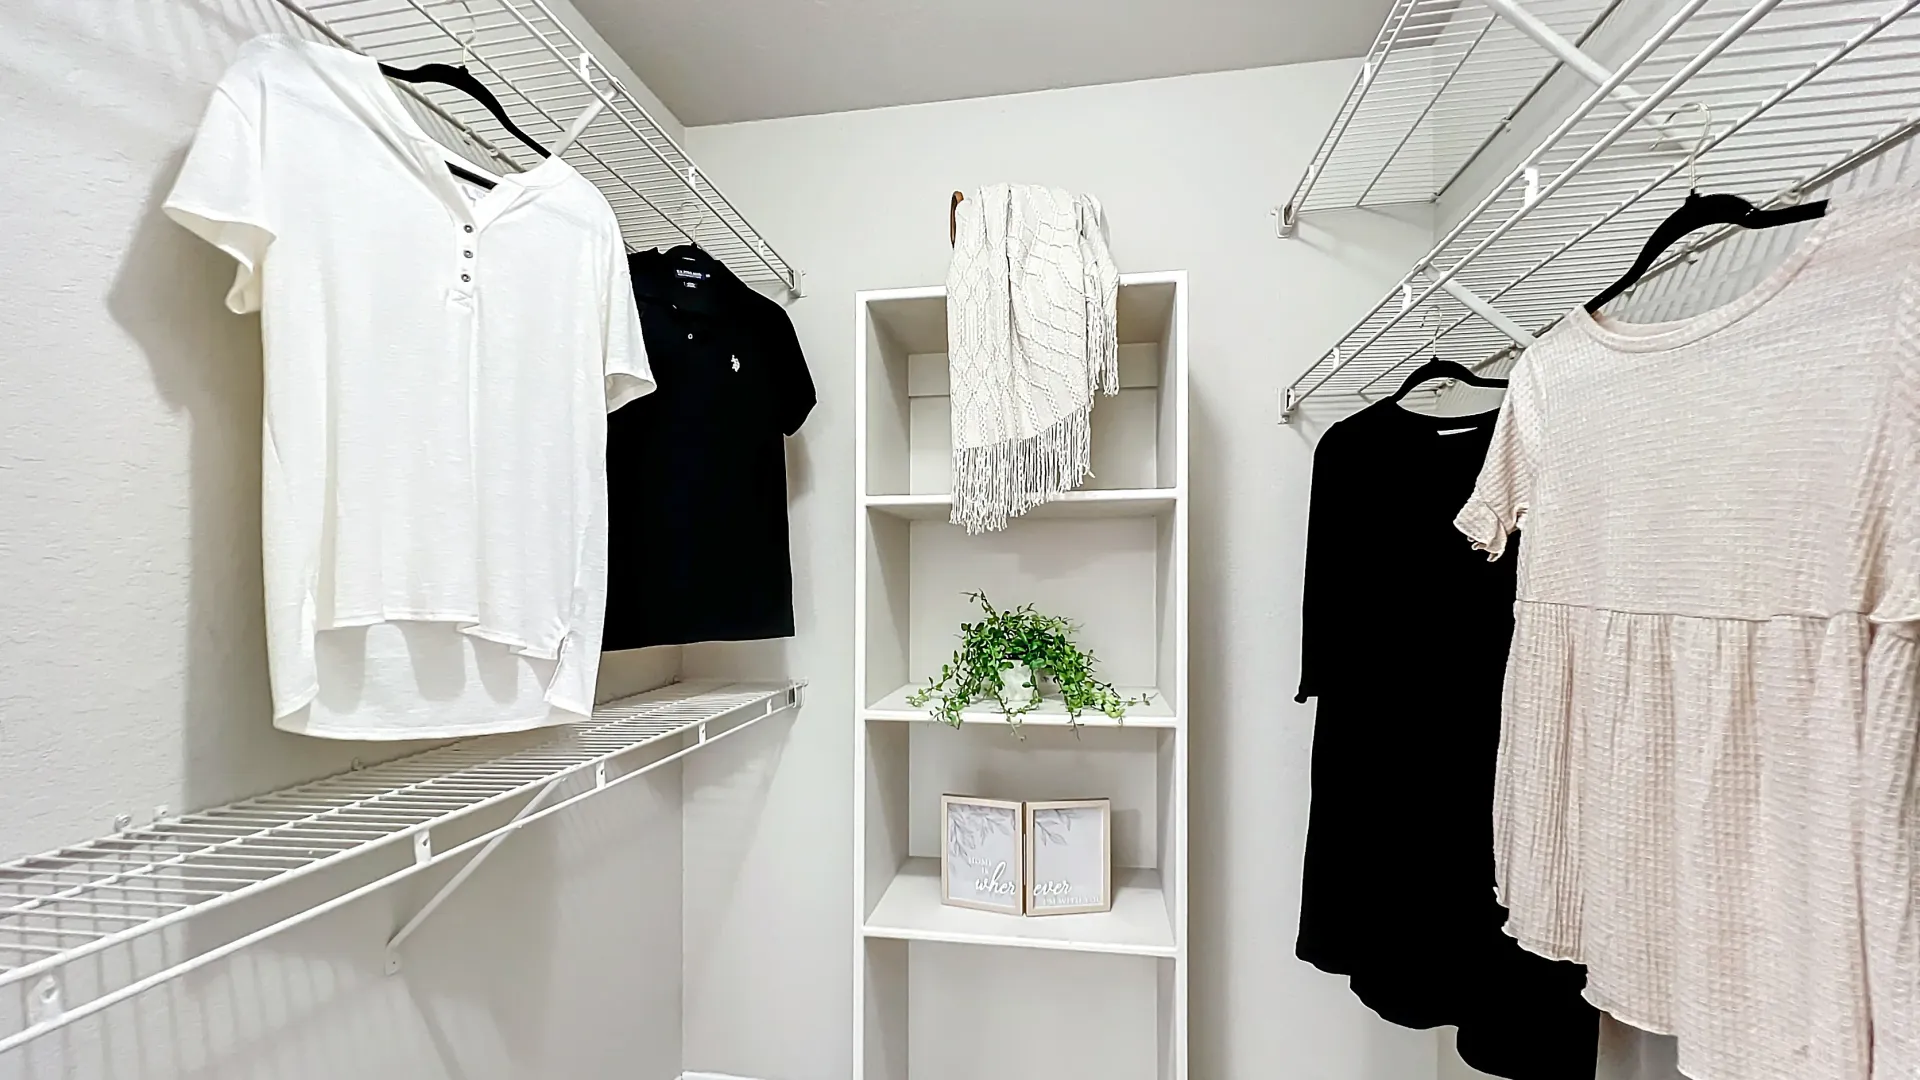 Spacious walk-in closet with modern shelving and hanging clothes.